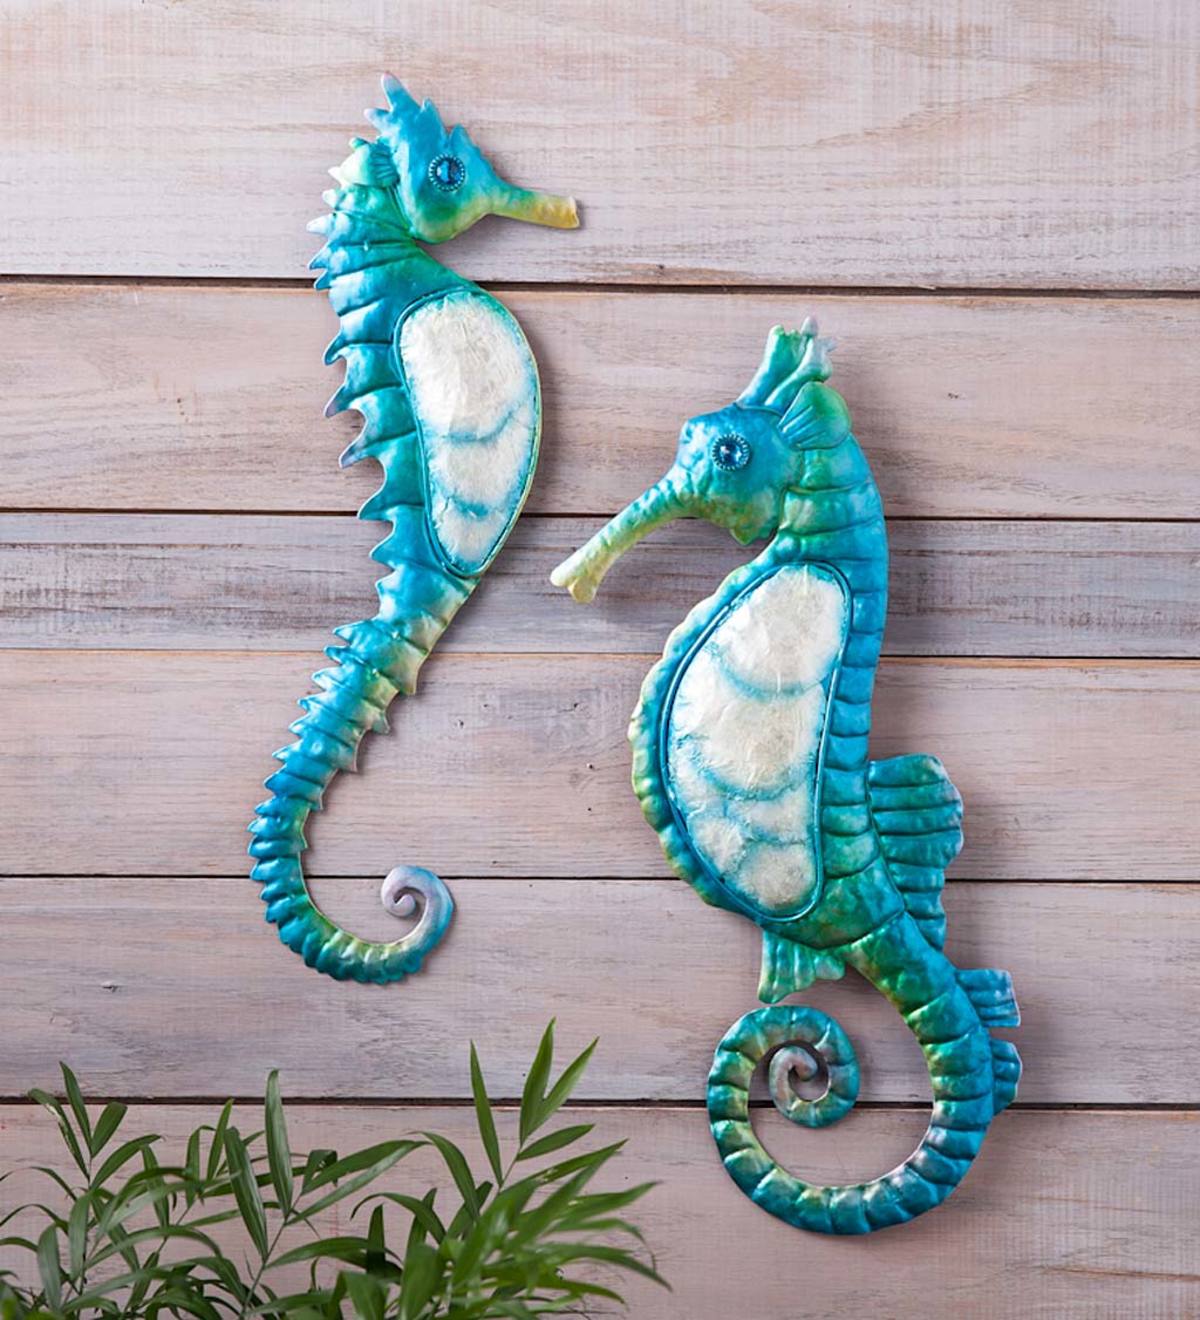 Pair of Blue Seahorses Glass and Metal Wall Art Decor Blue 22"L x 17" Wide 1326 